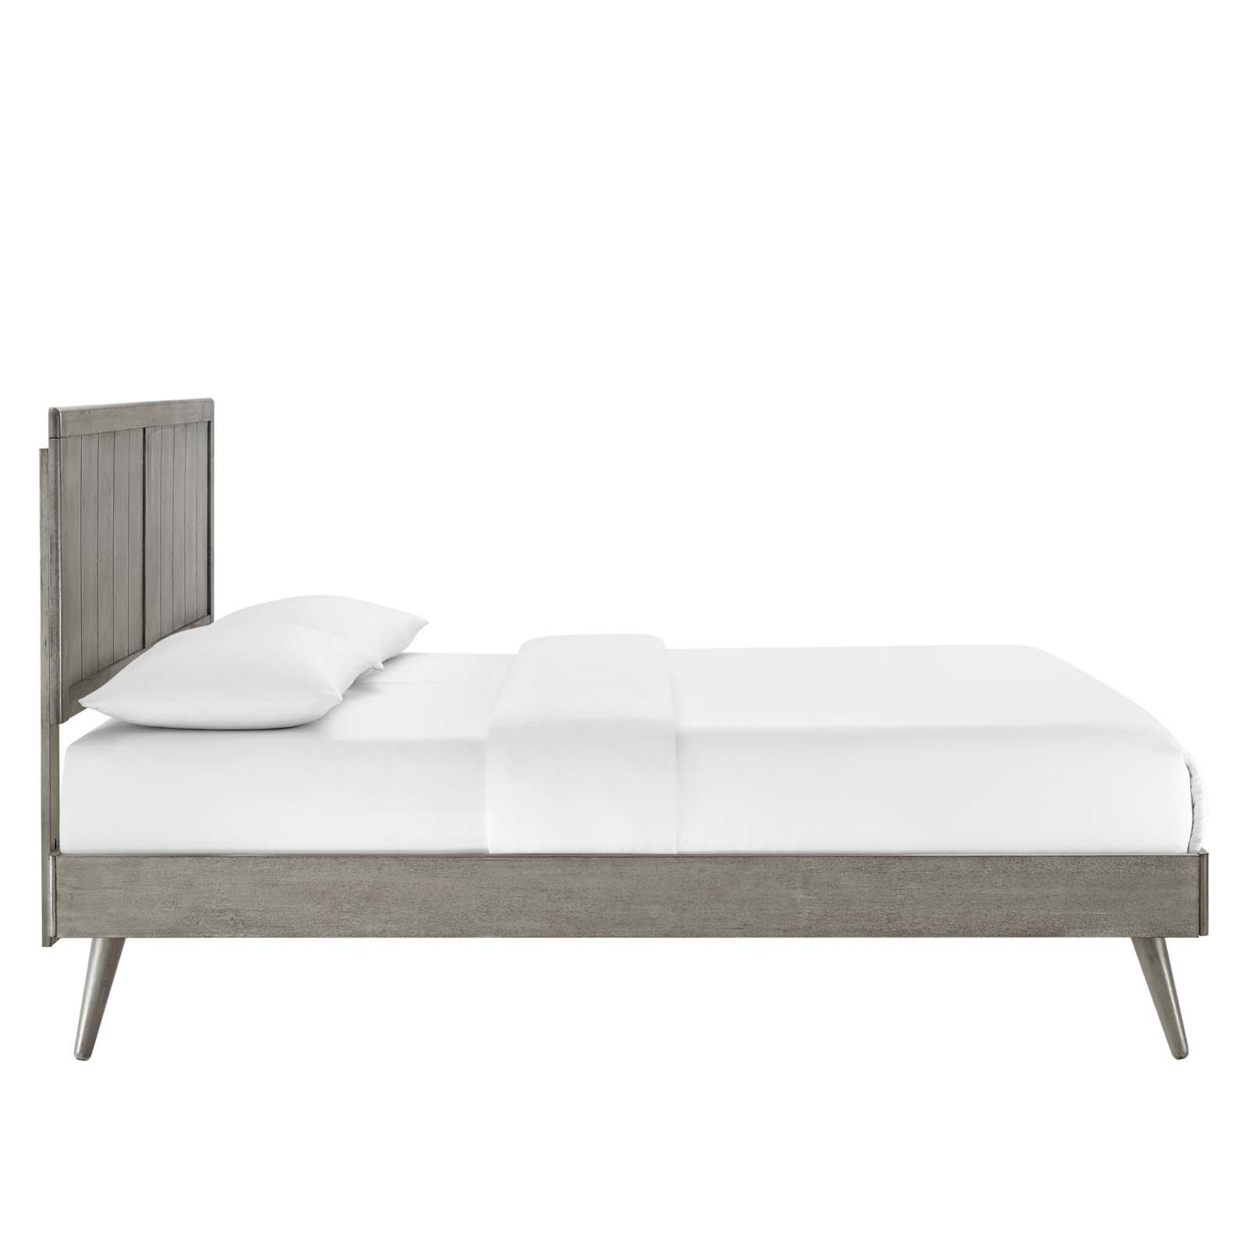 Alana Full Wood Platform Bed With Splayed Legs, Gray